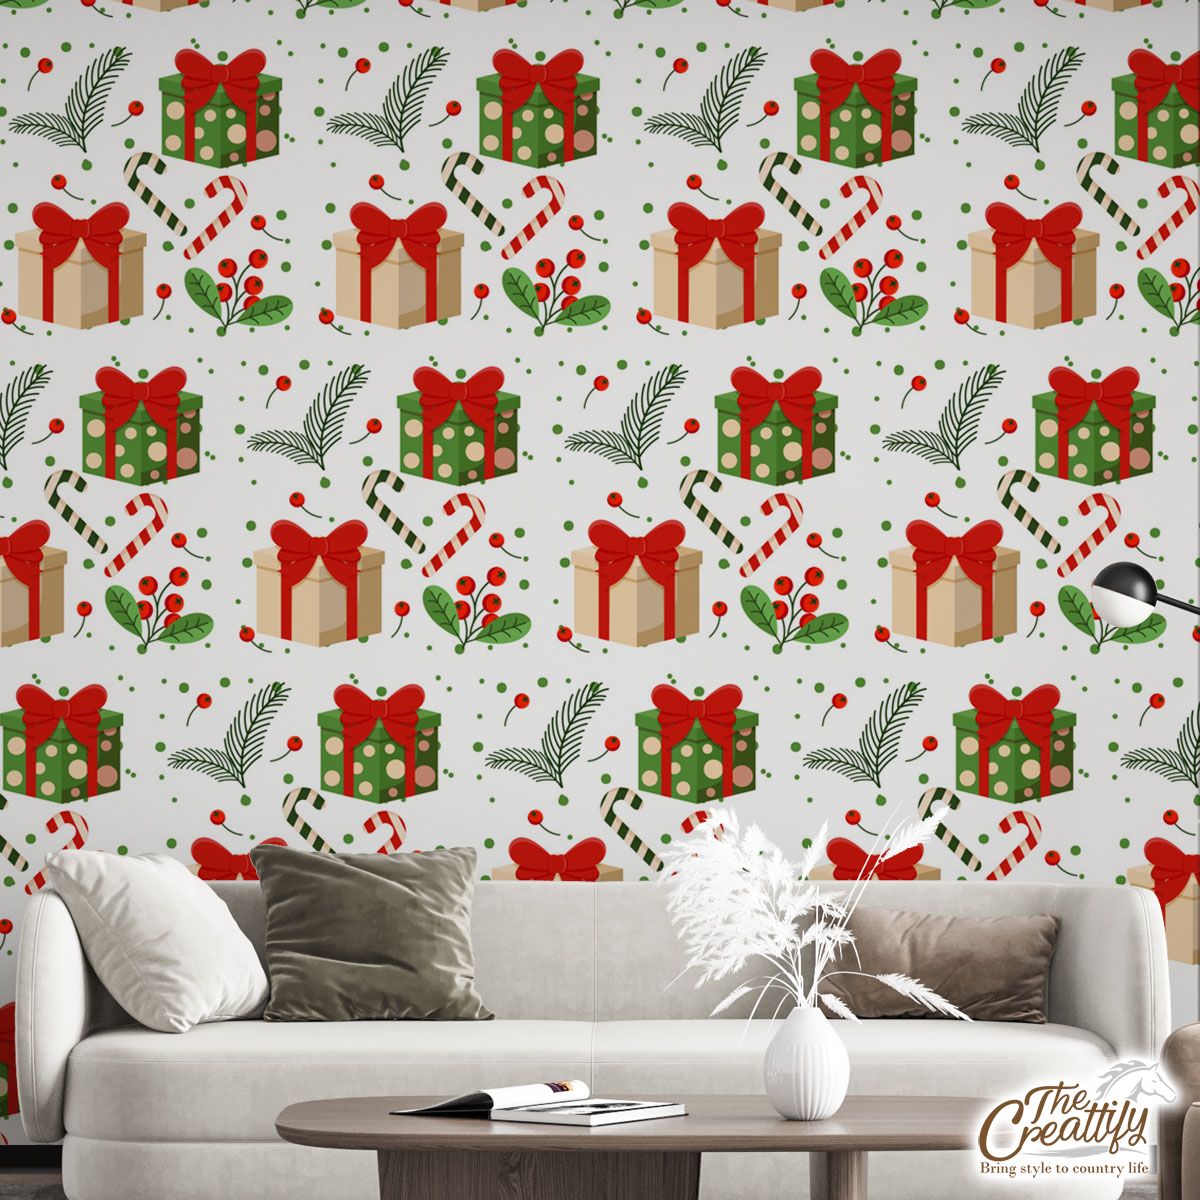 Christmas Gifts And Red Berries Wall Mural